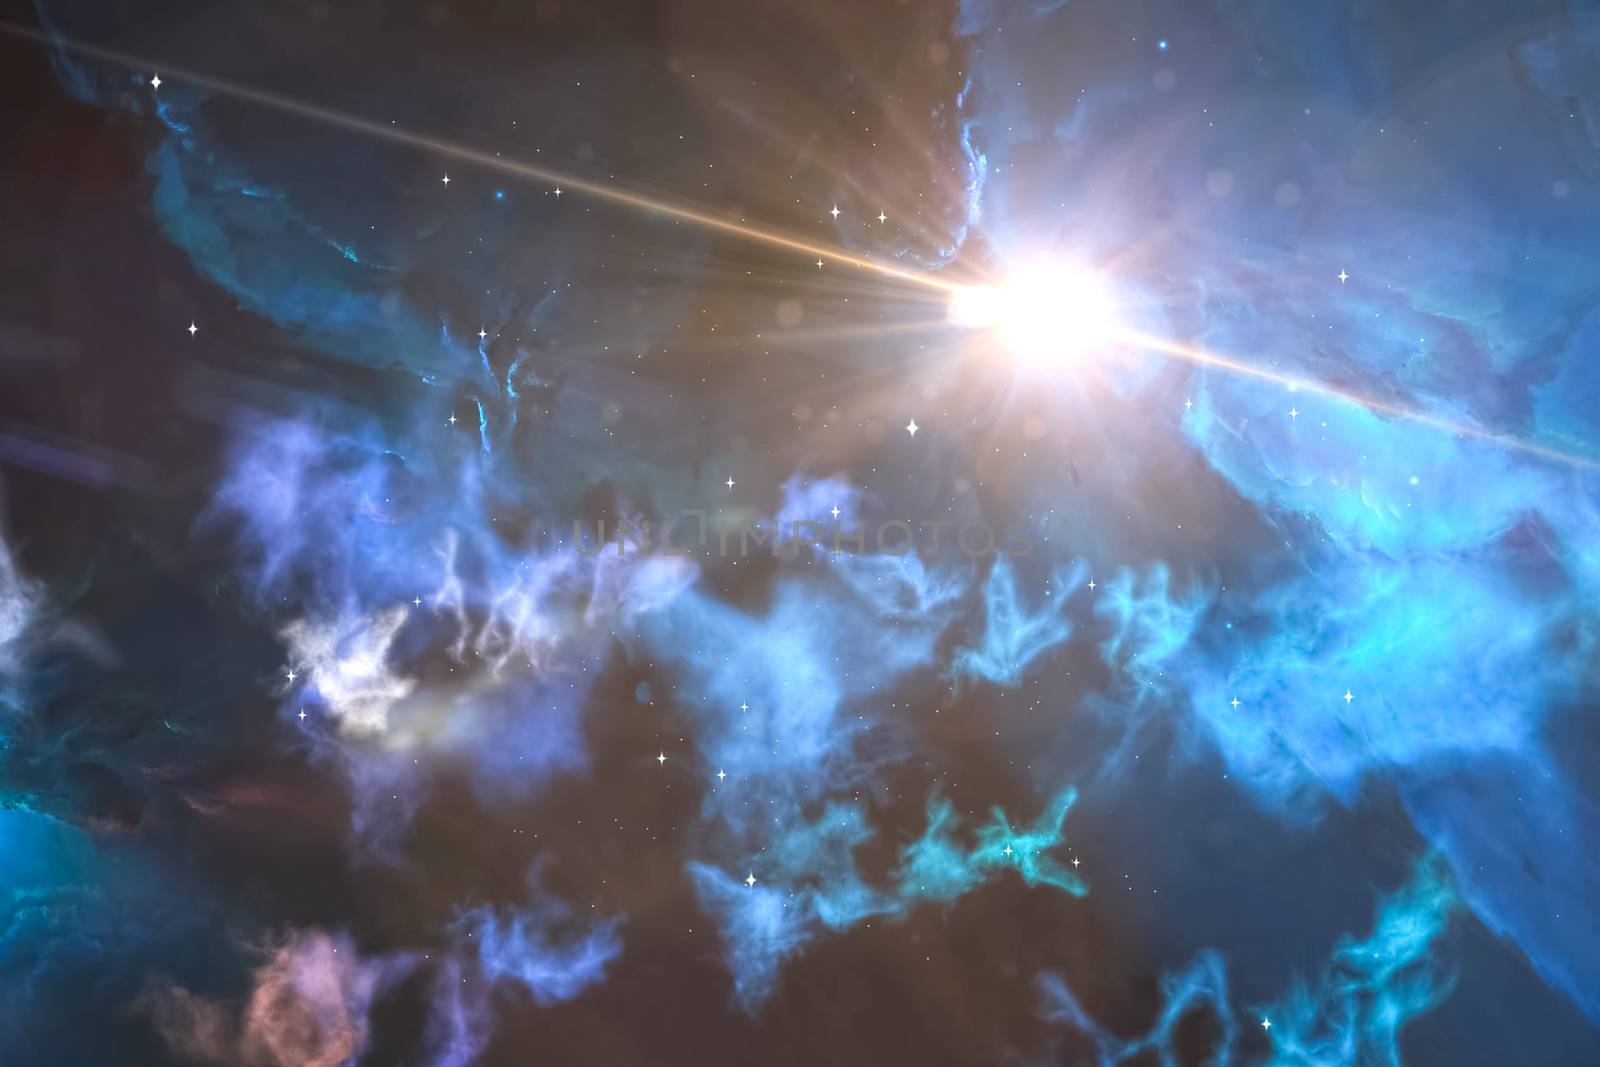 A supernova explosion in the universe among gas clouds.